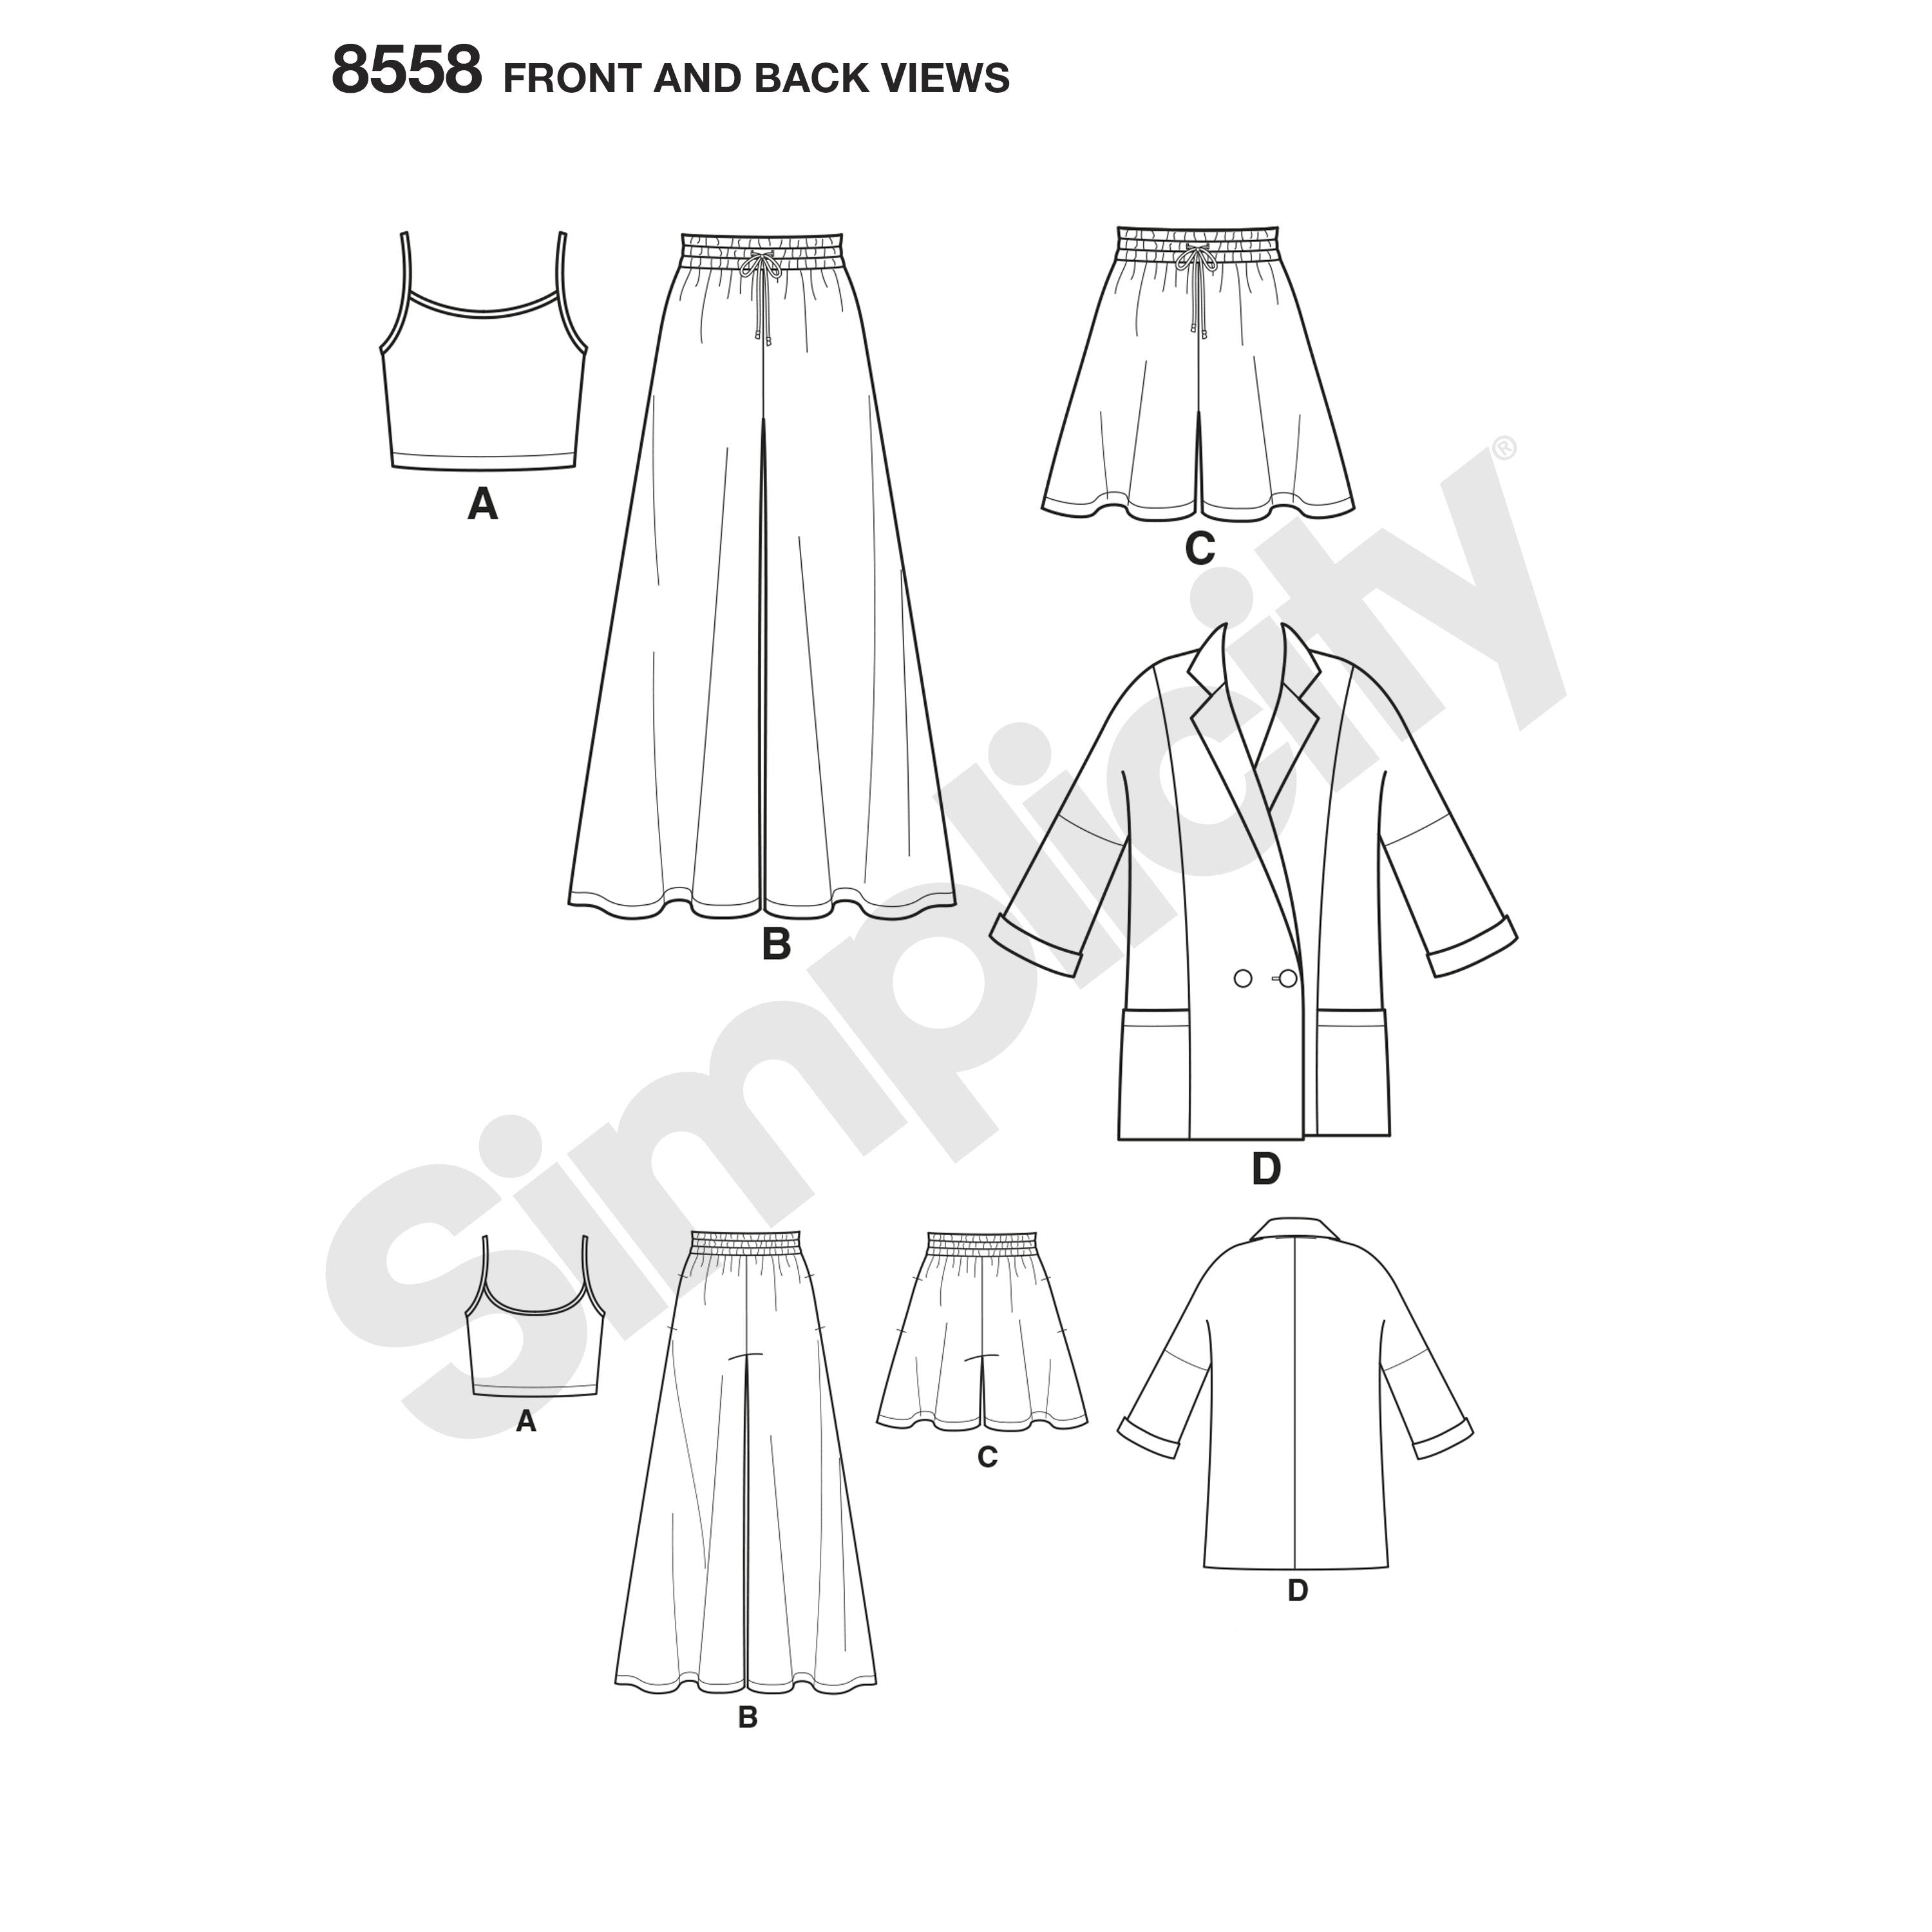 Simplicity Pattern 8558 womens separates from Jaycotts Sewing Supplies